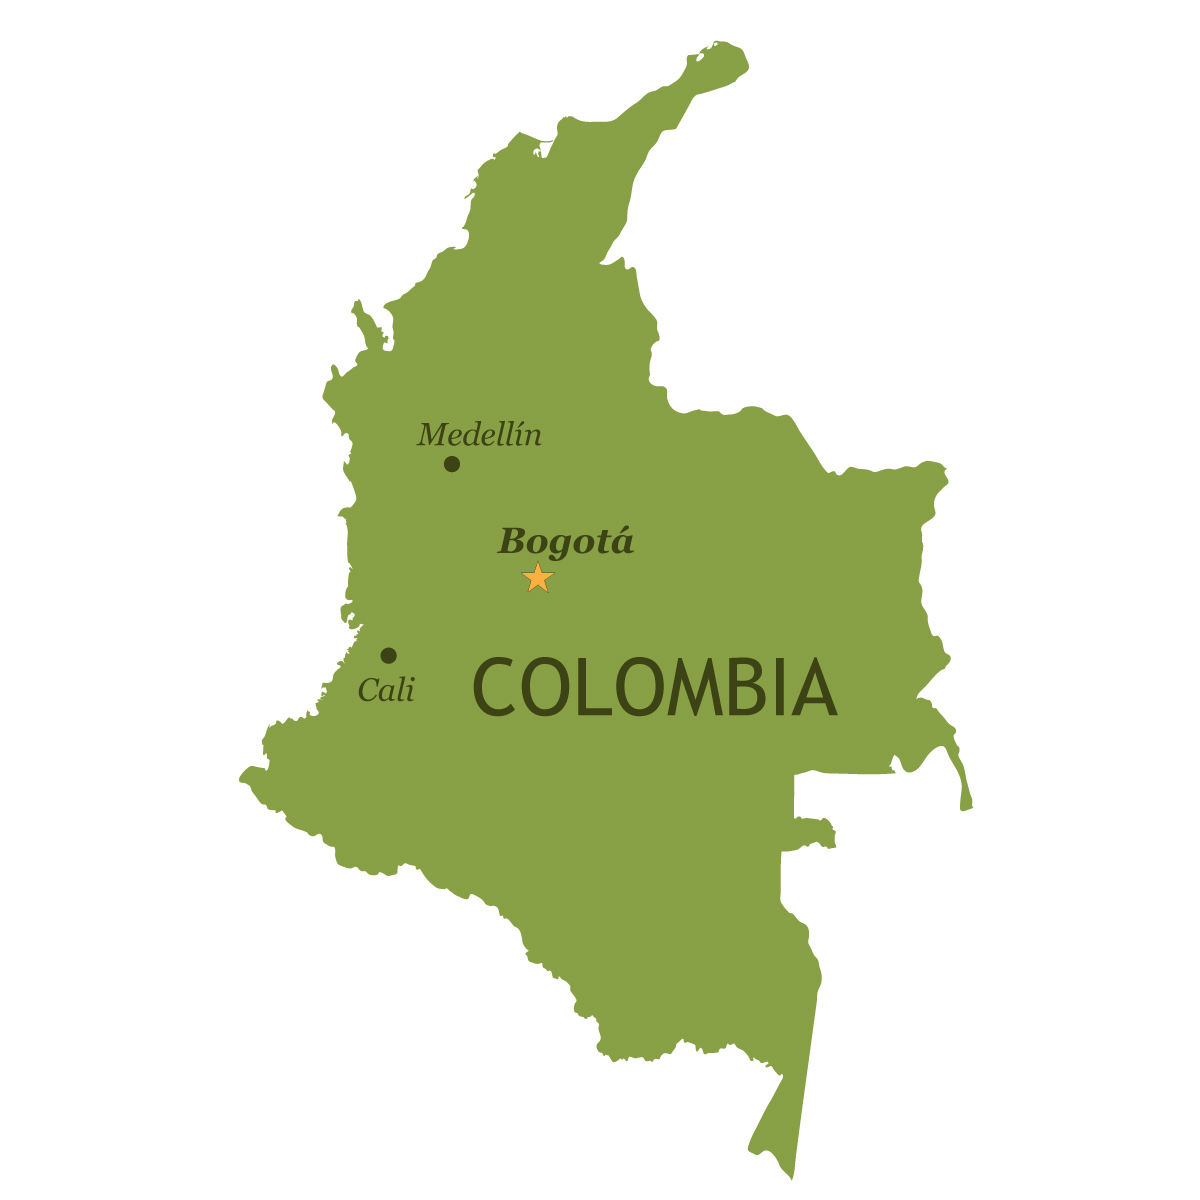 Map of Colombia with major cities